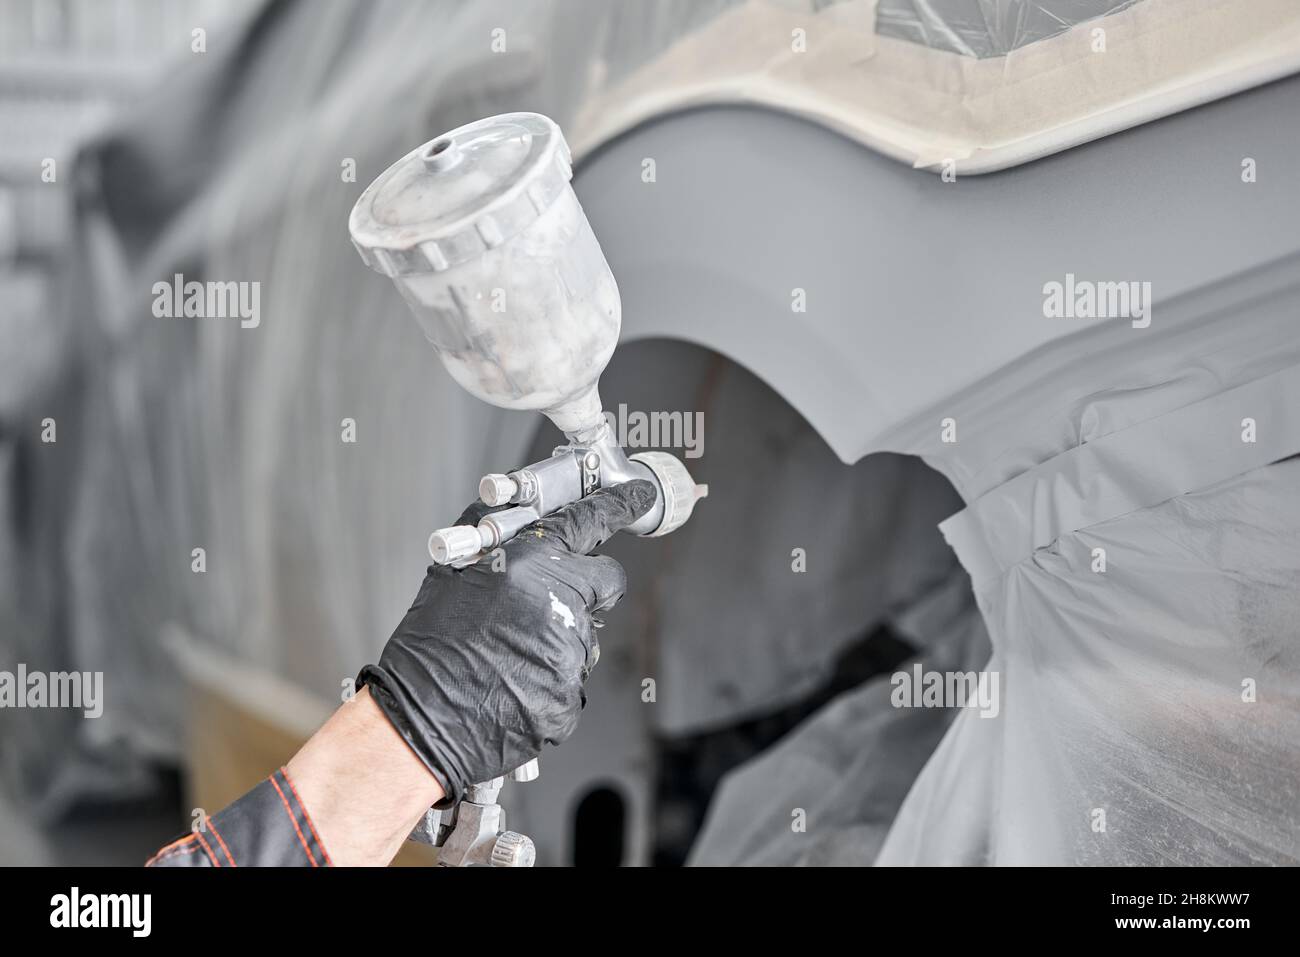 Painting the rear part of the car. Car painter wearing costume and protective gear. Car service station. Restoring a car after an accident. Stock Photo